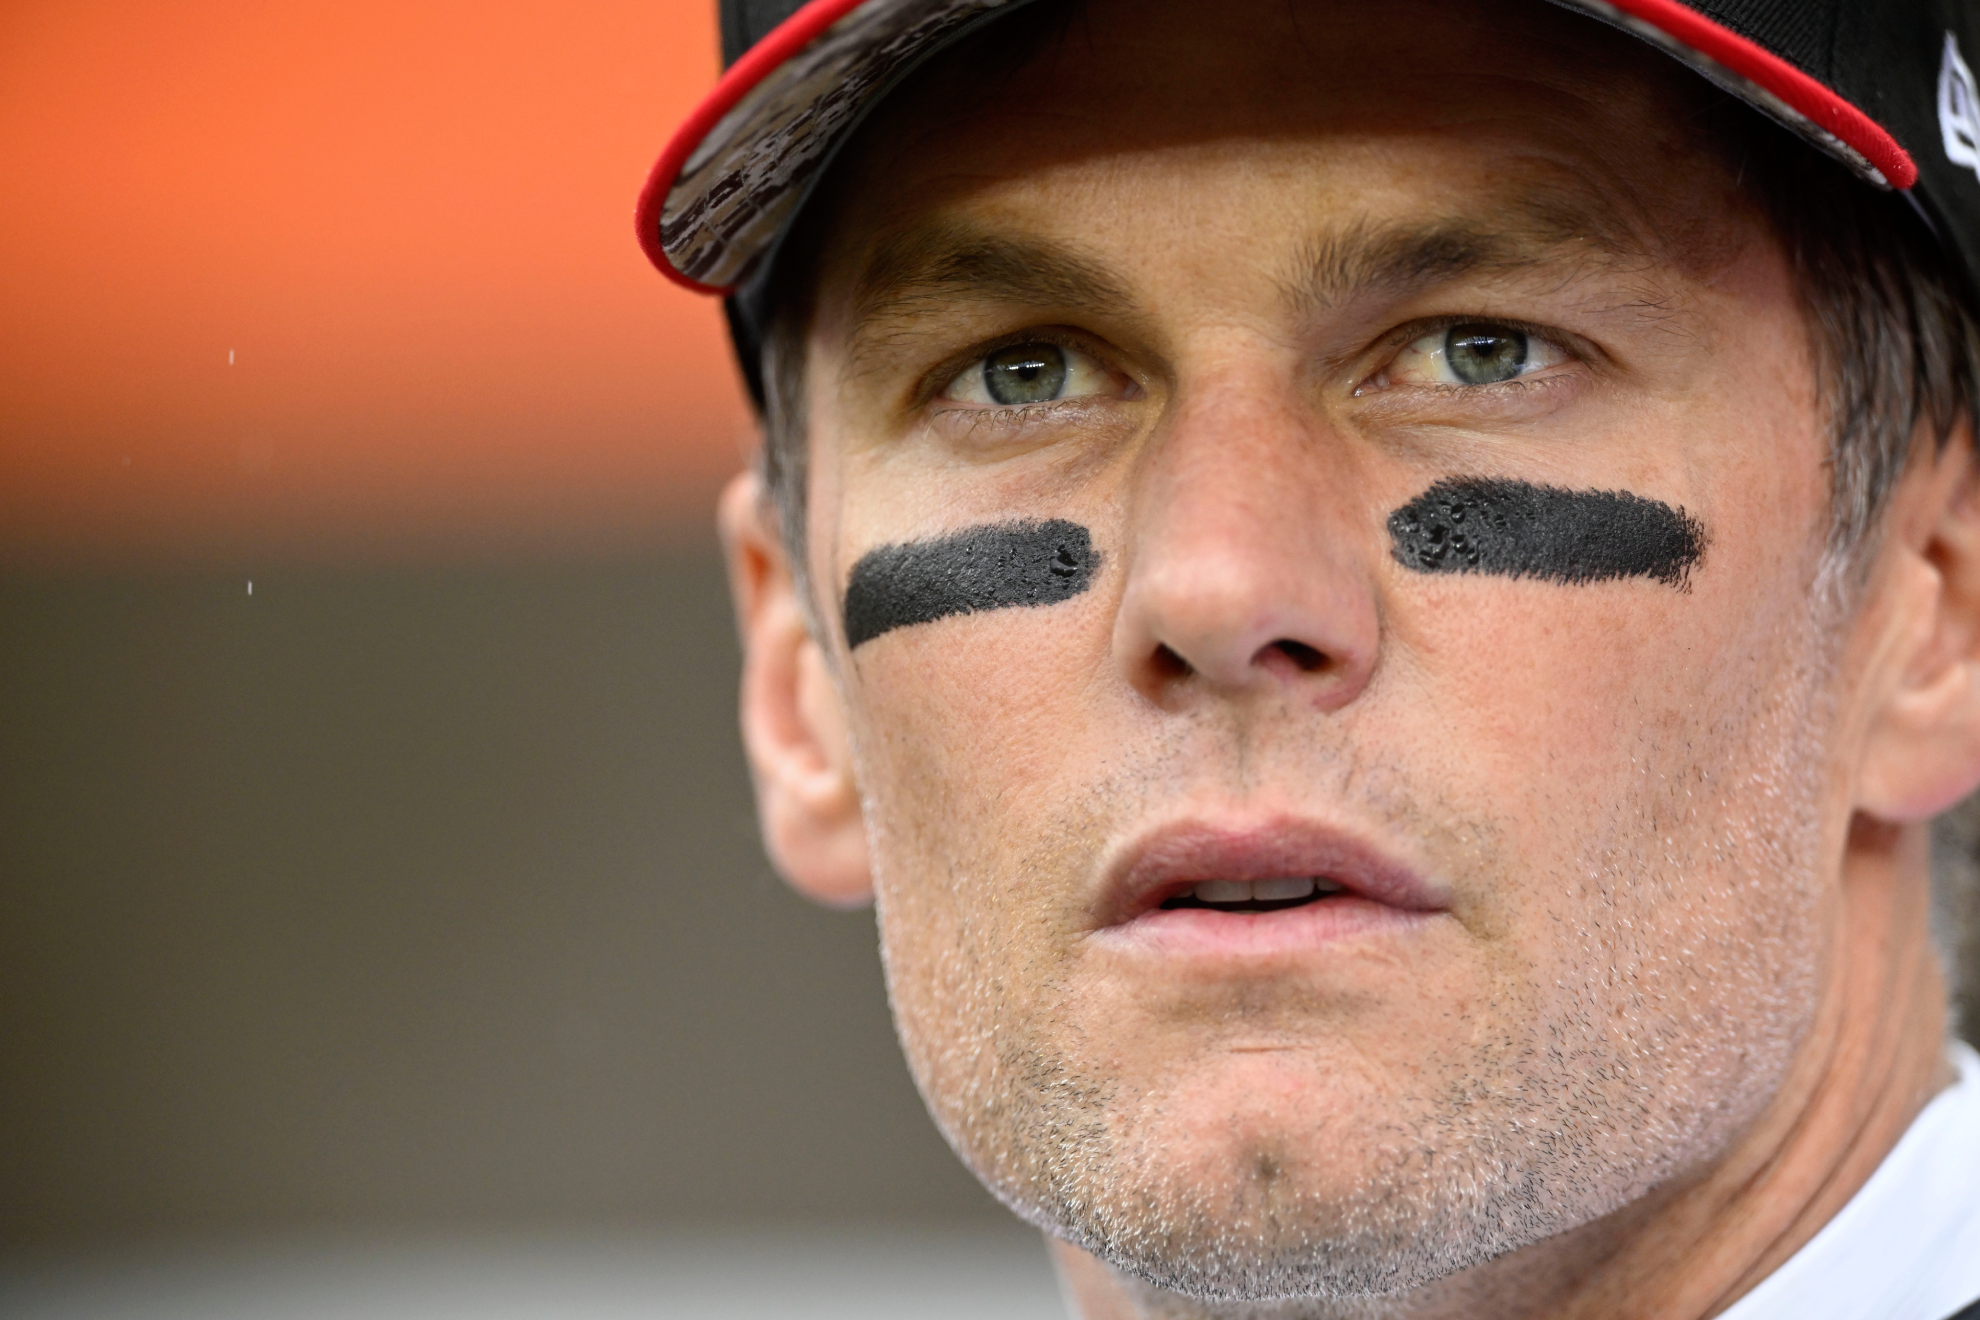 Tom Brady calls out mediocre NFL with Steven A Smith in epic rant about the league